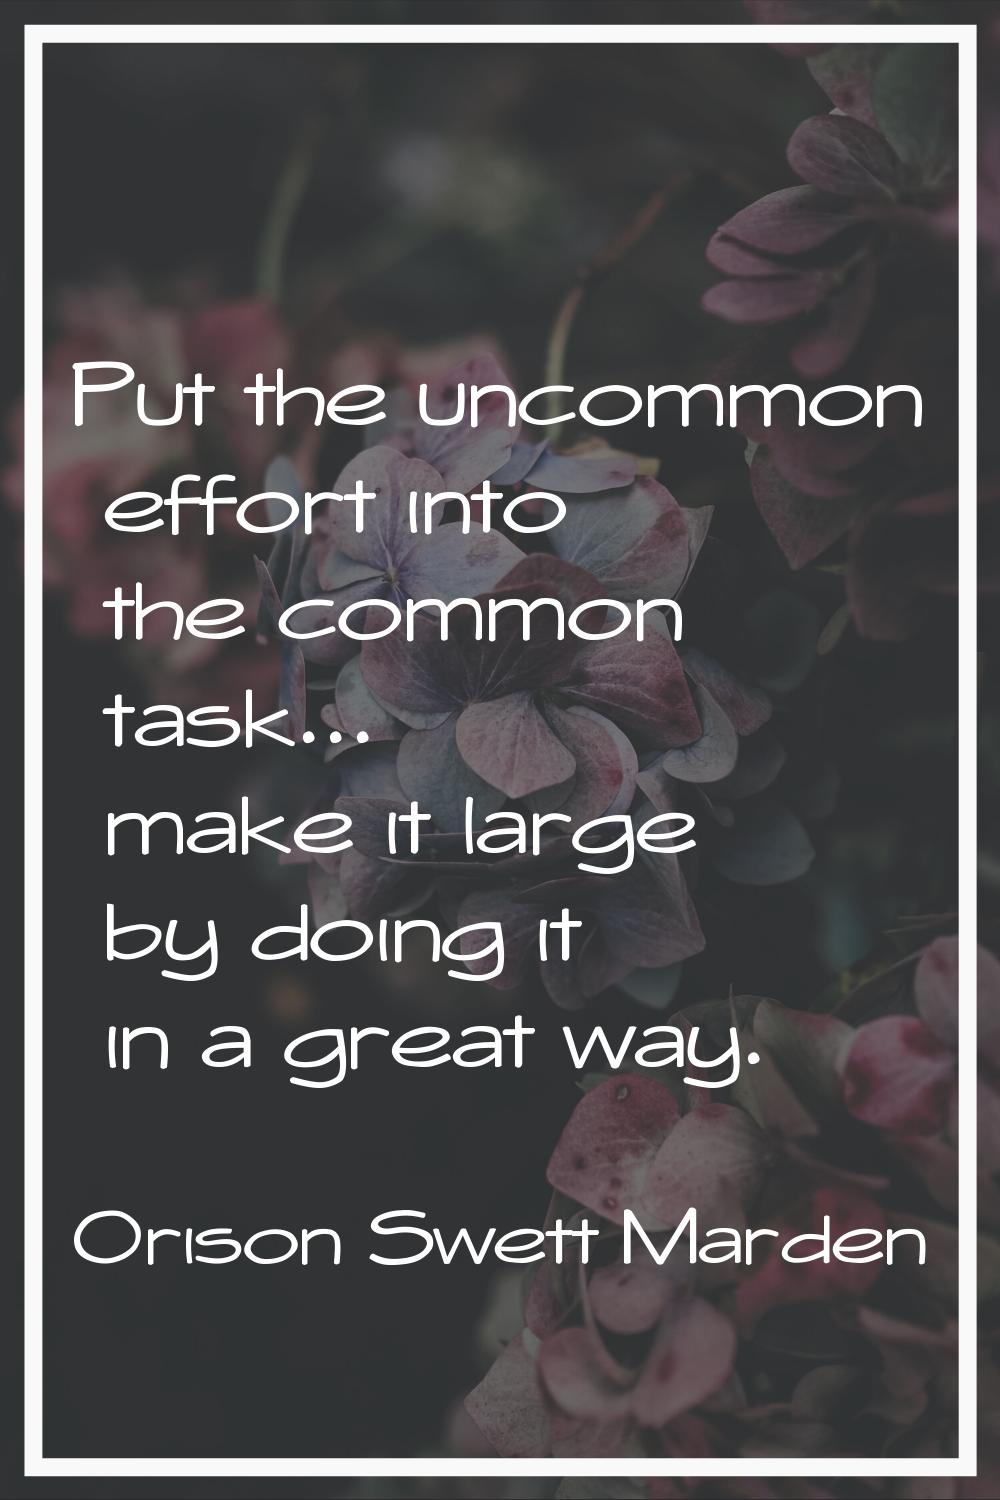 Put the uncommon effort into the common task... make it large by doing it in a great way.